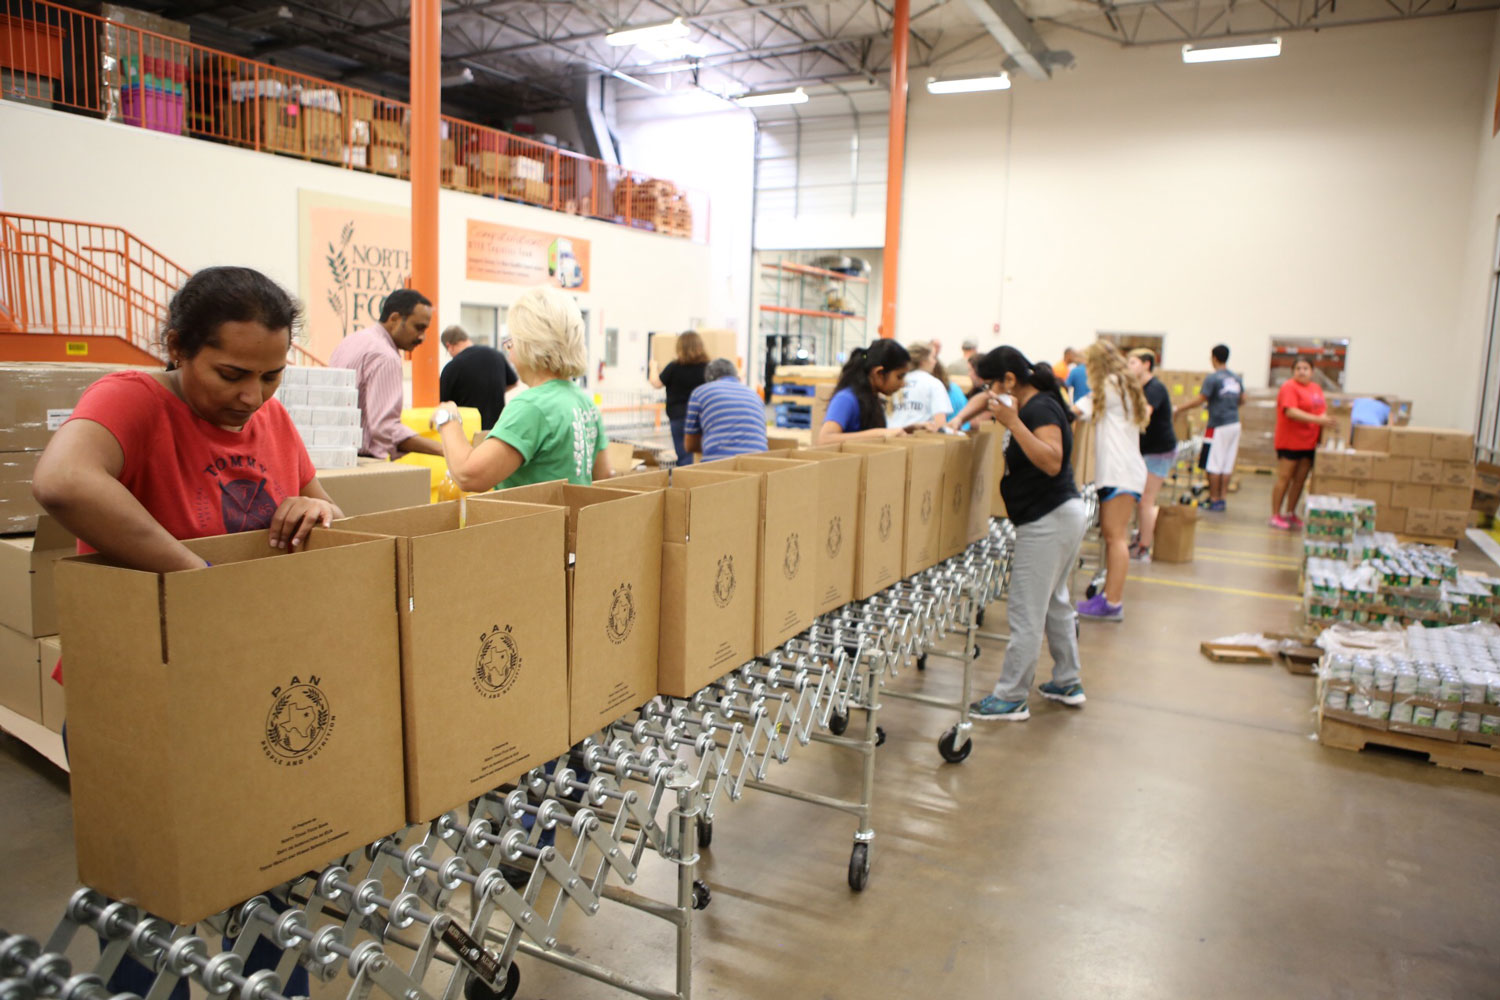 North Texas Food Bank issues urgent appeal for volunteers